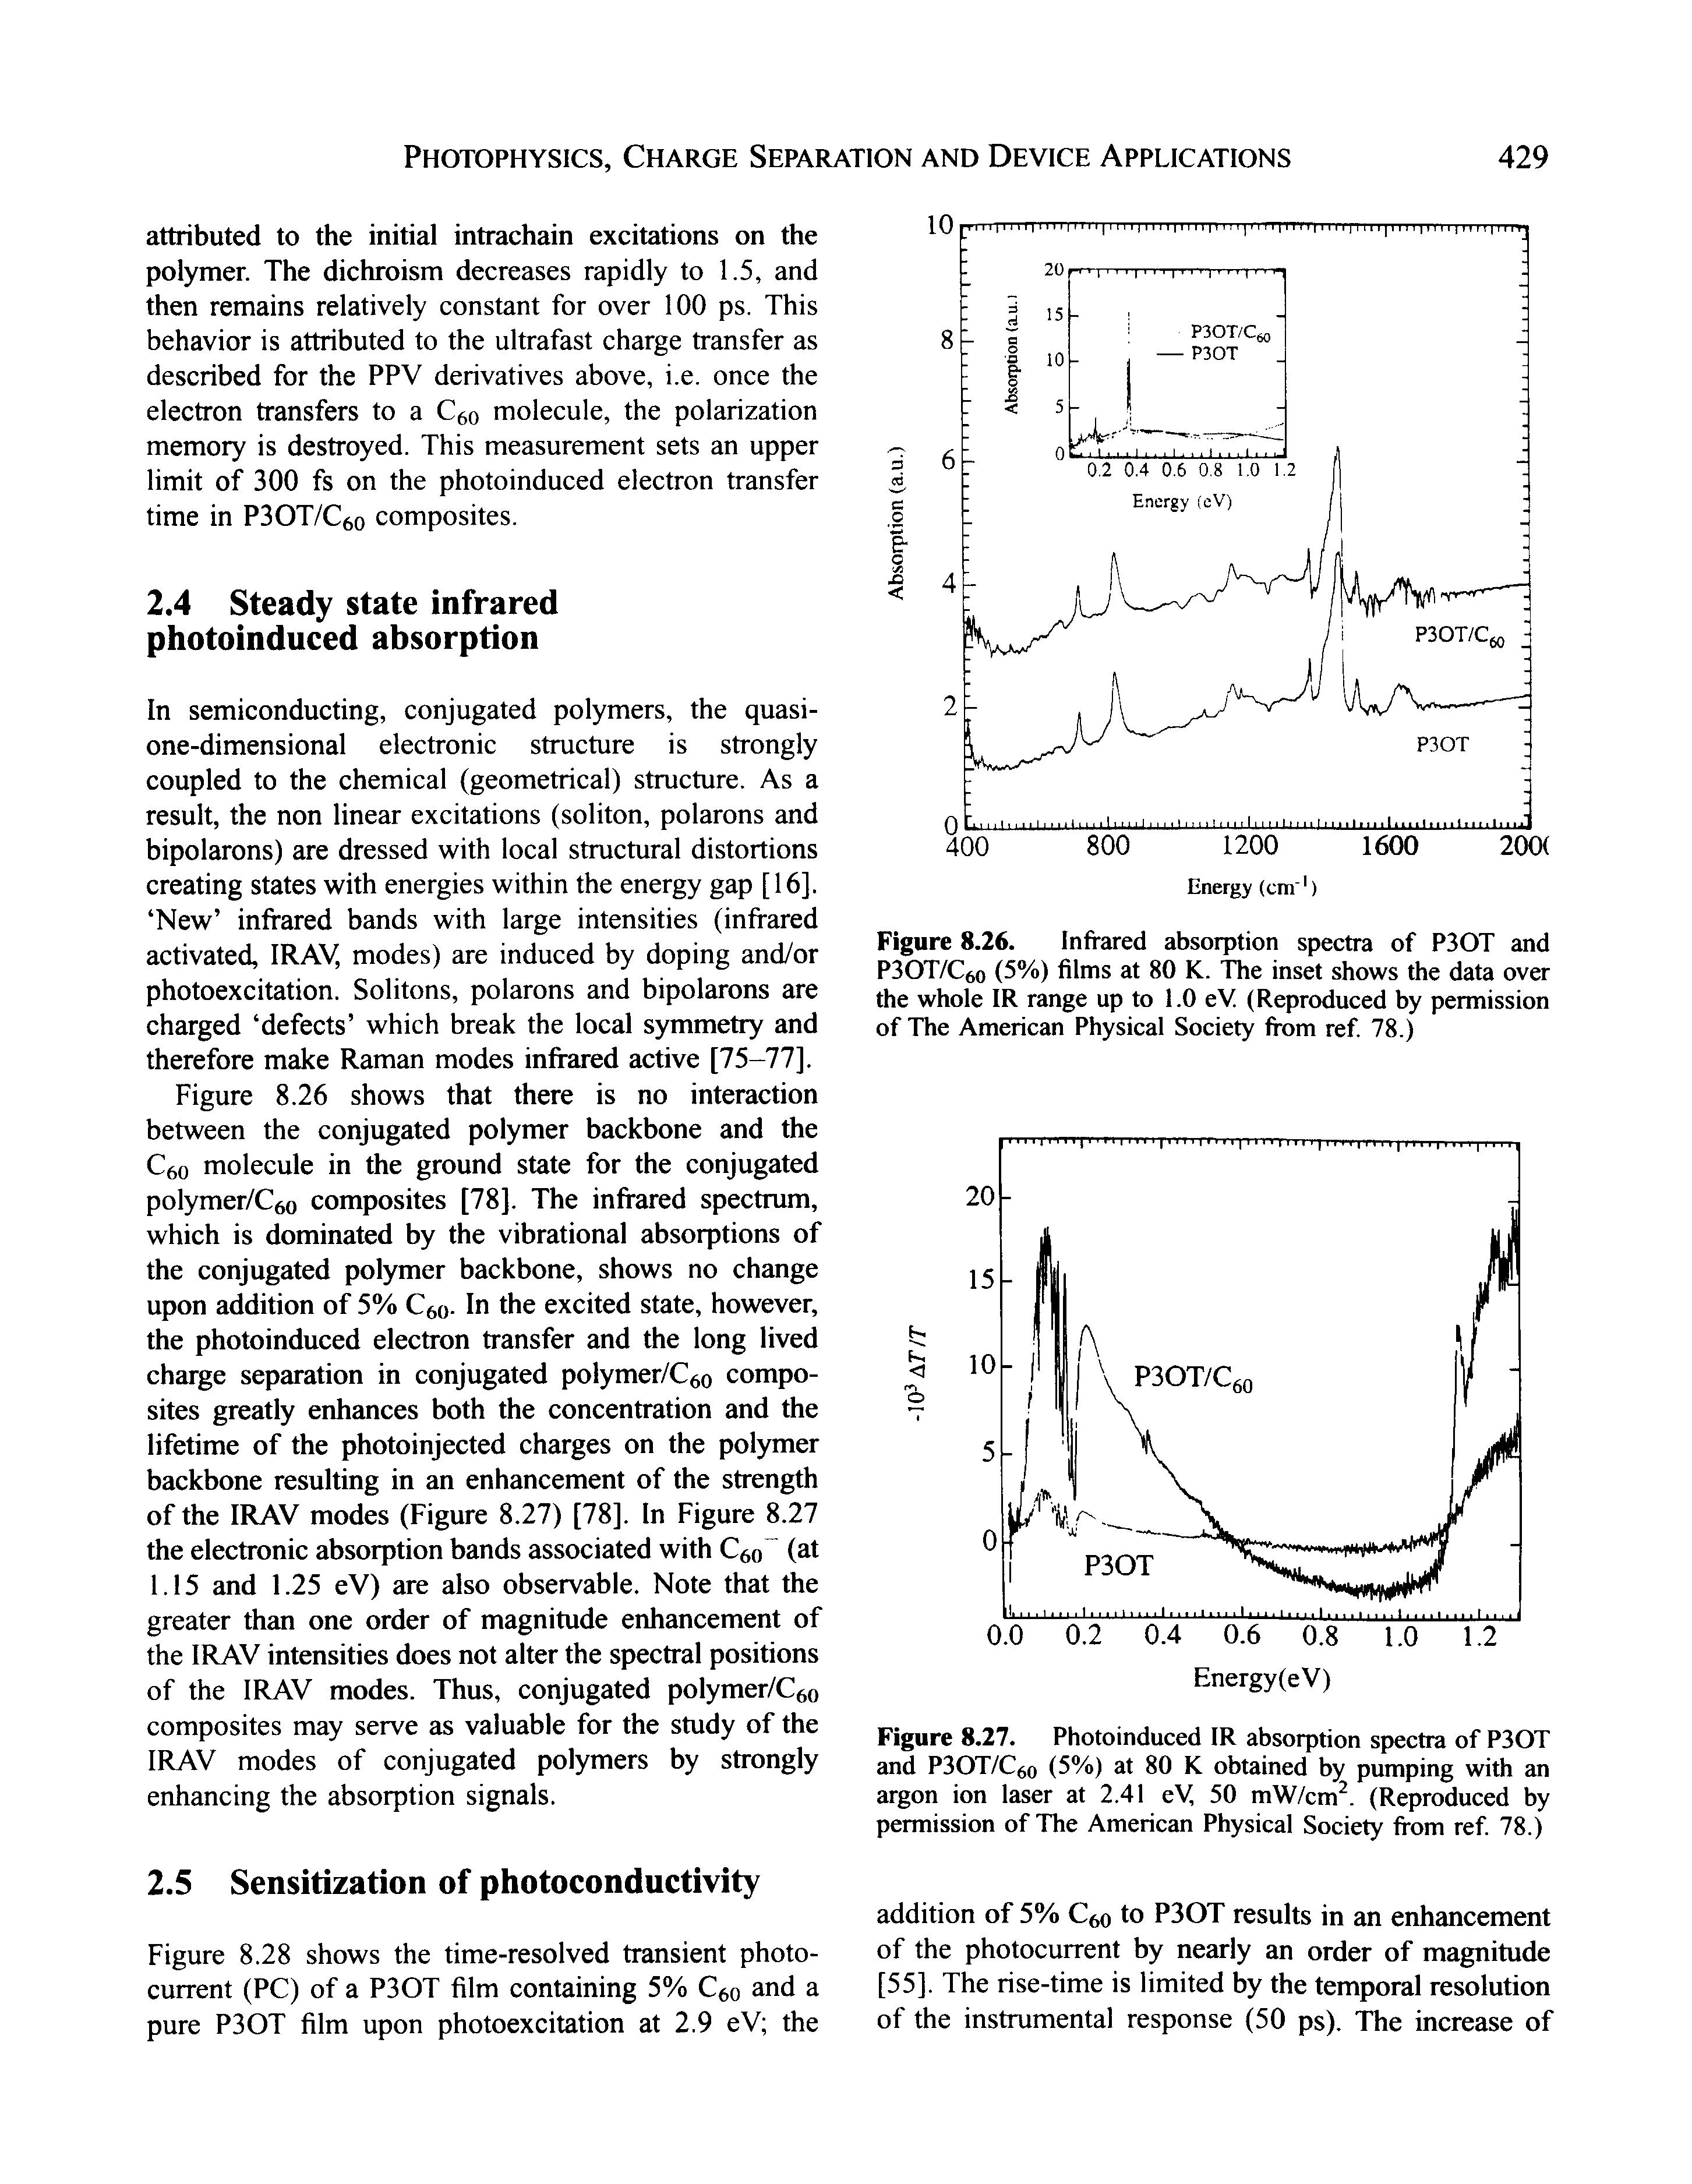 Figure 8.27. Photoinduced IR absorption spectra of P30T and P3OT/C60 (5%) at 80 K obtained by pumping with an argon ion laser at 2.41 eV, 50 mW/cm. (Reproduced by permission of The American Physical Society from ref 78.)...